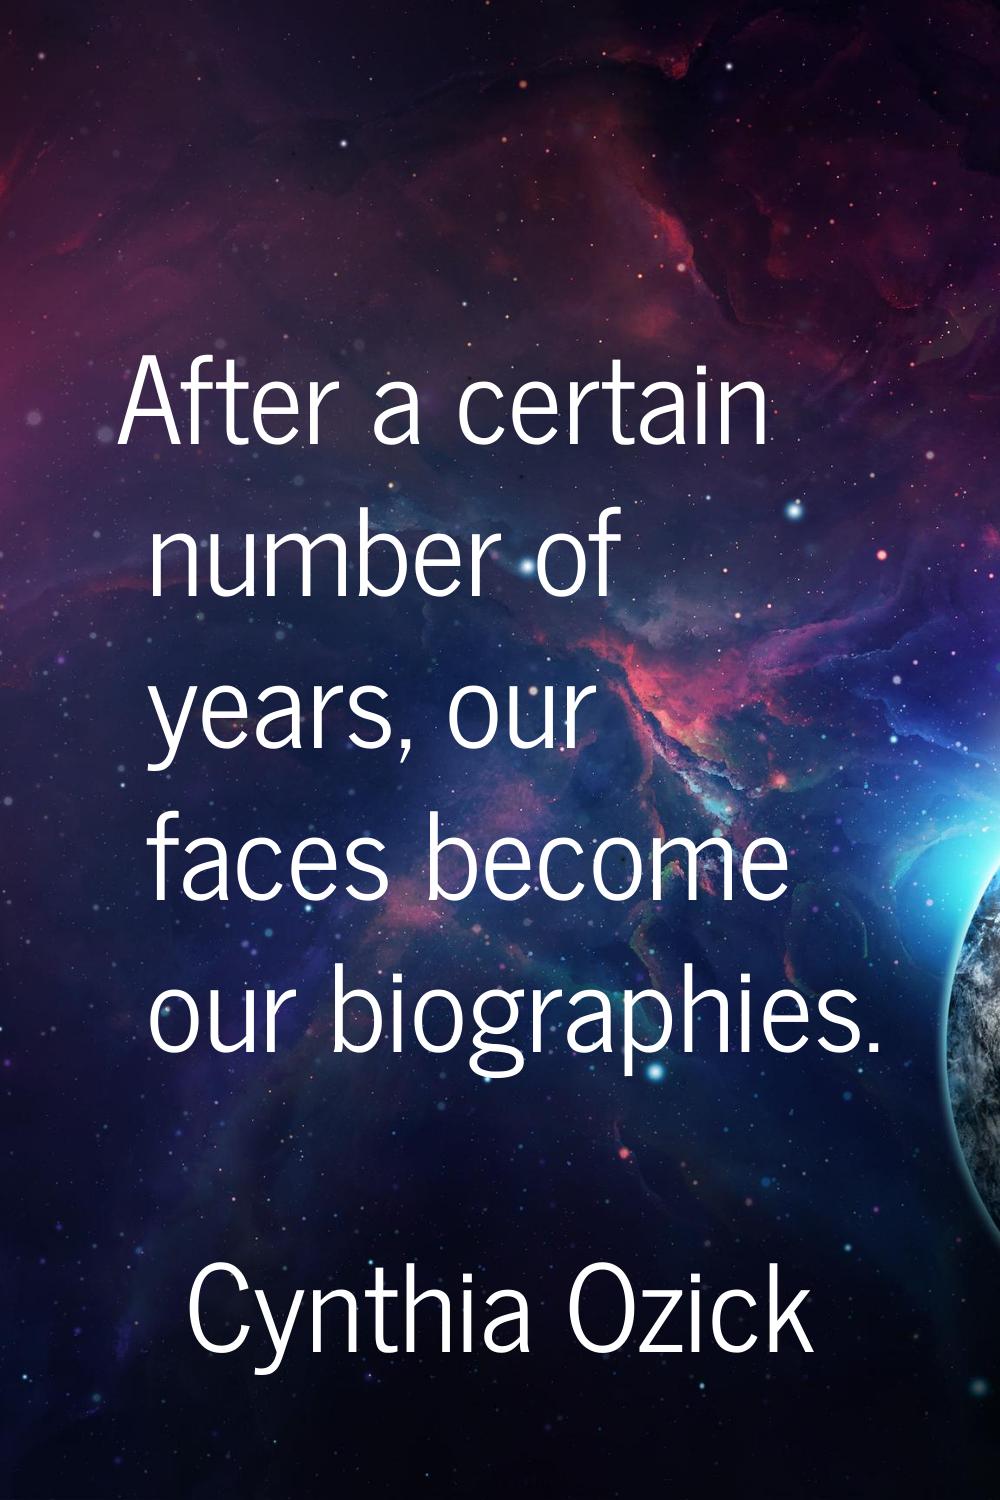 After a certain number of years, our faces become our biographies.